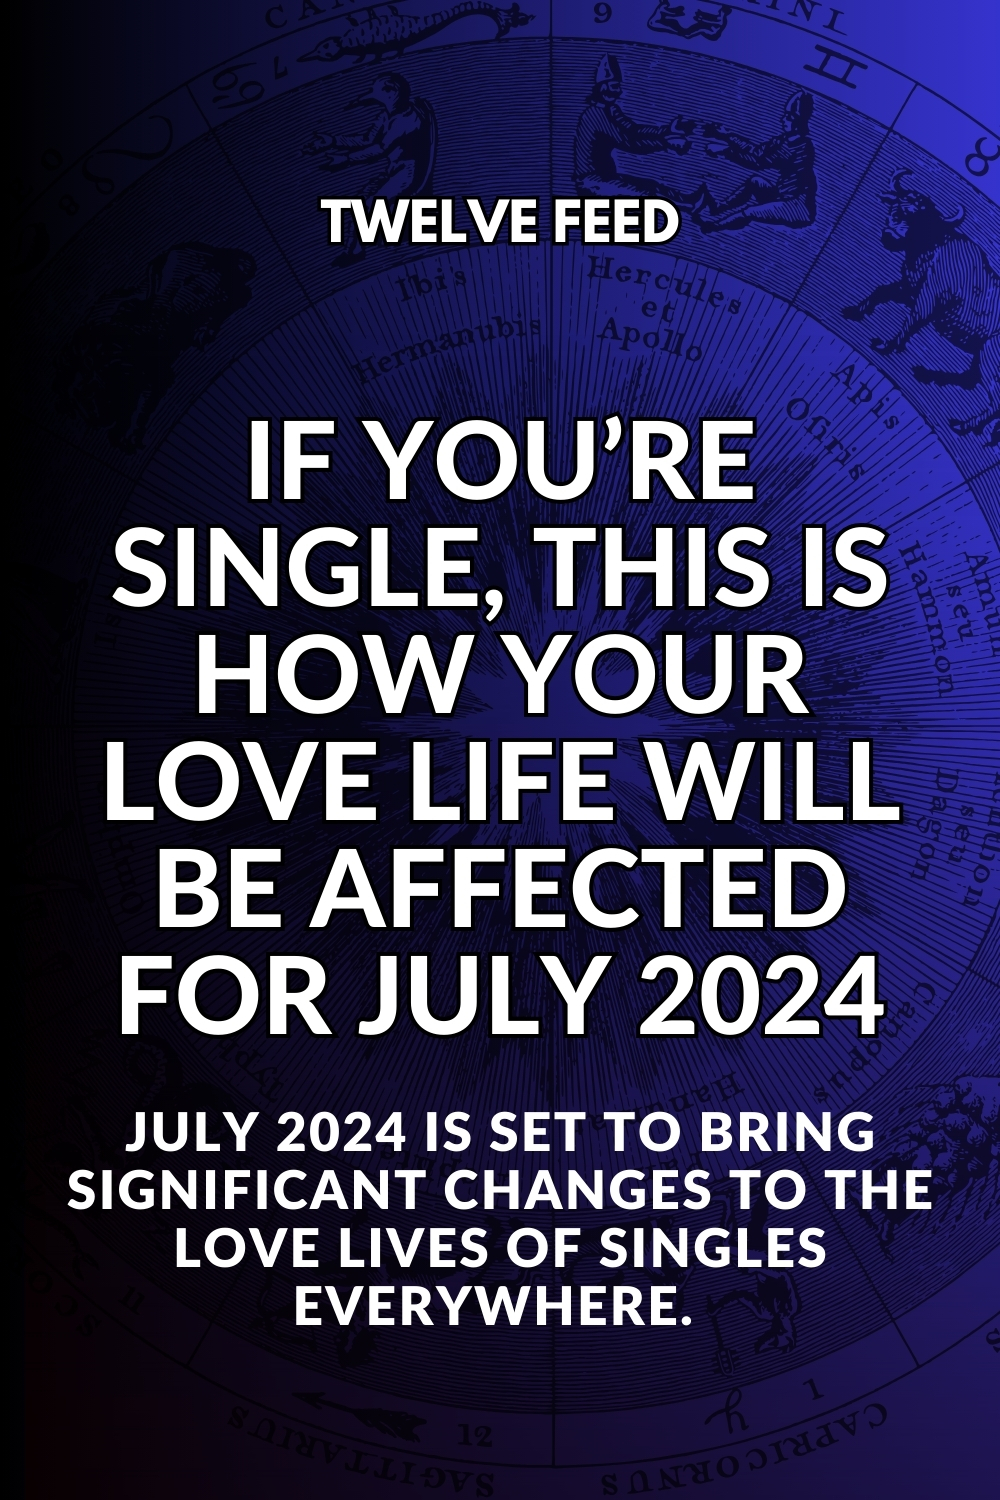 If You’re Single, This Is How Your Love Life Will Be Affected For July 2024